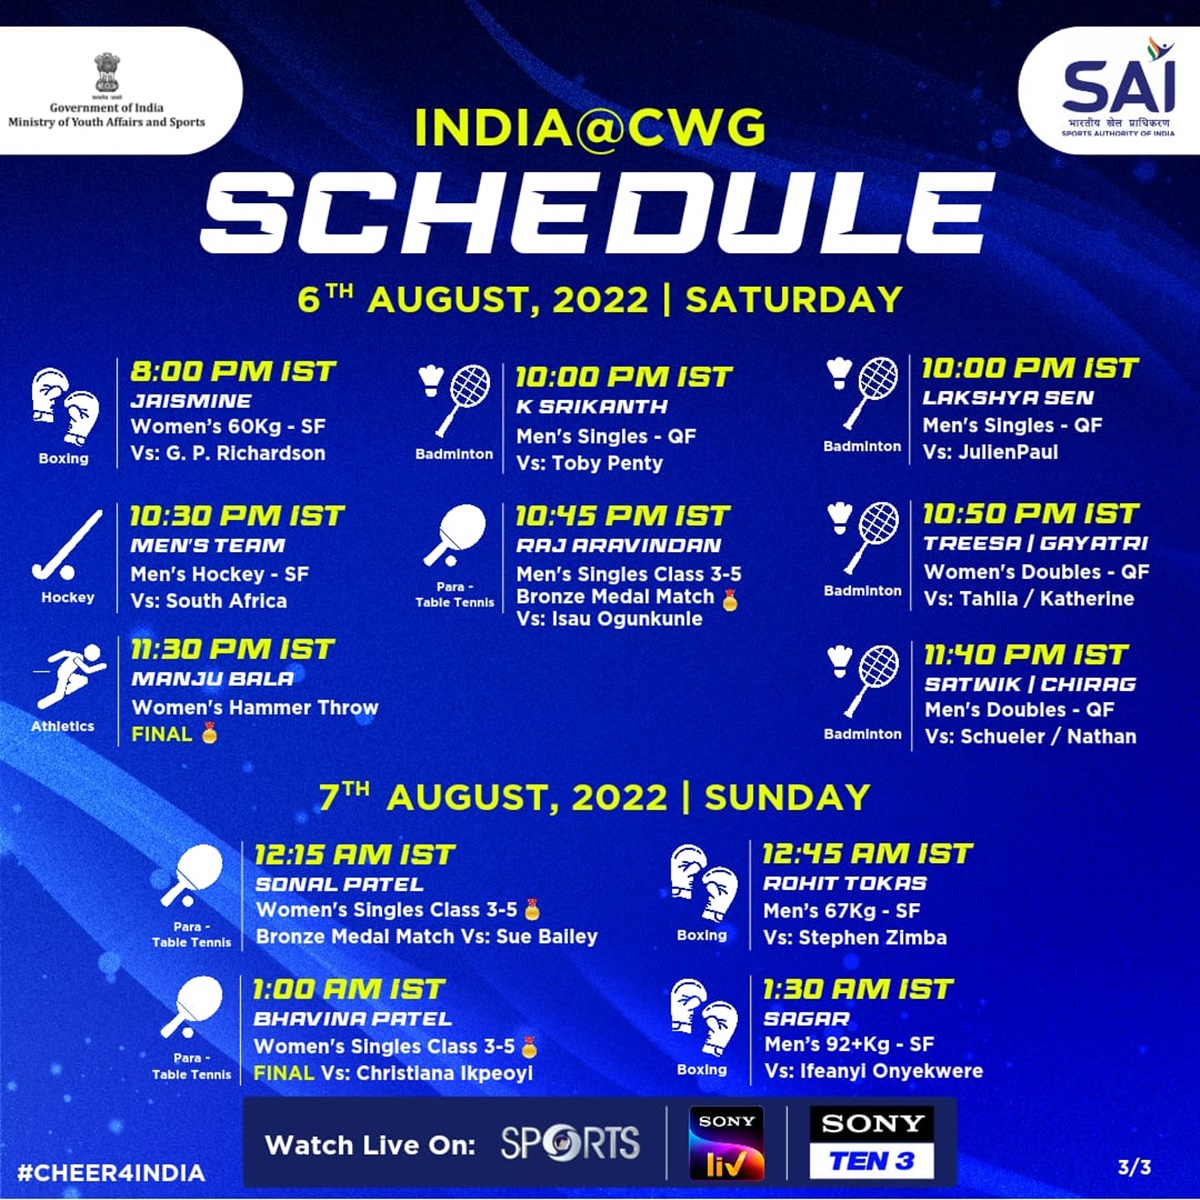 CWG 2022: Check out India's schedule on Saturday, August 6 - Rediff Sports